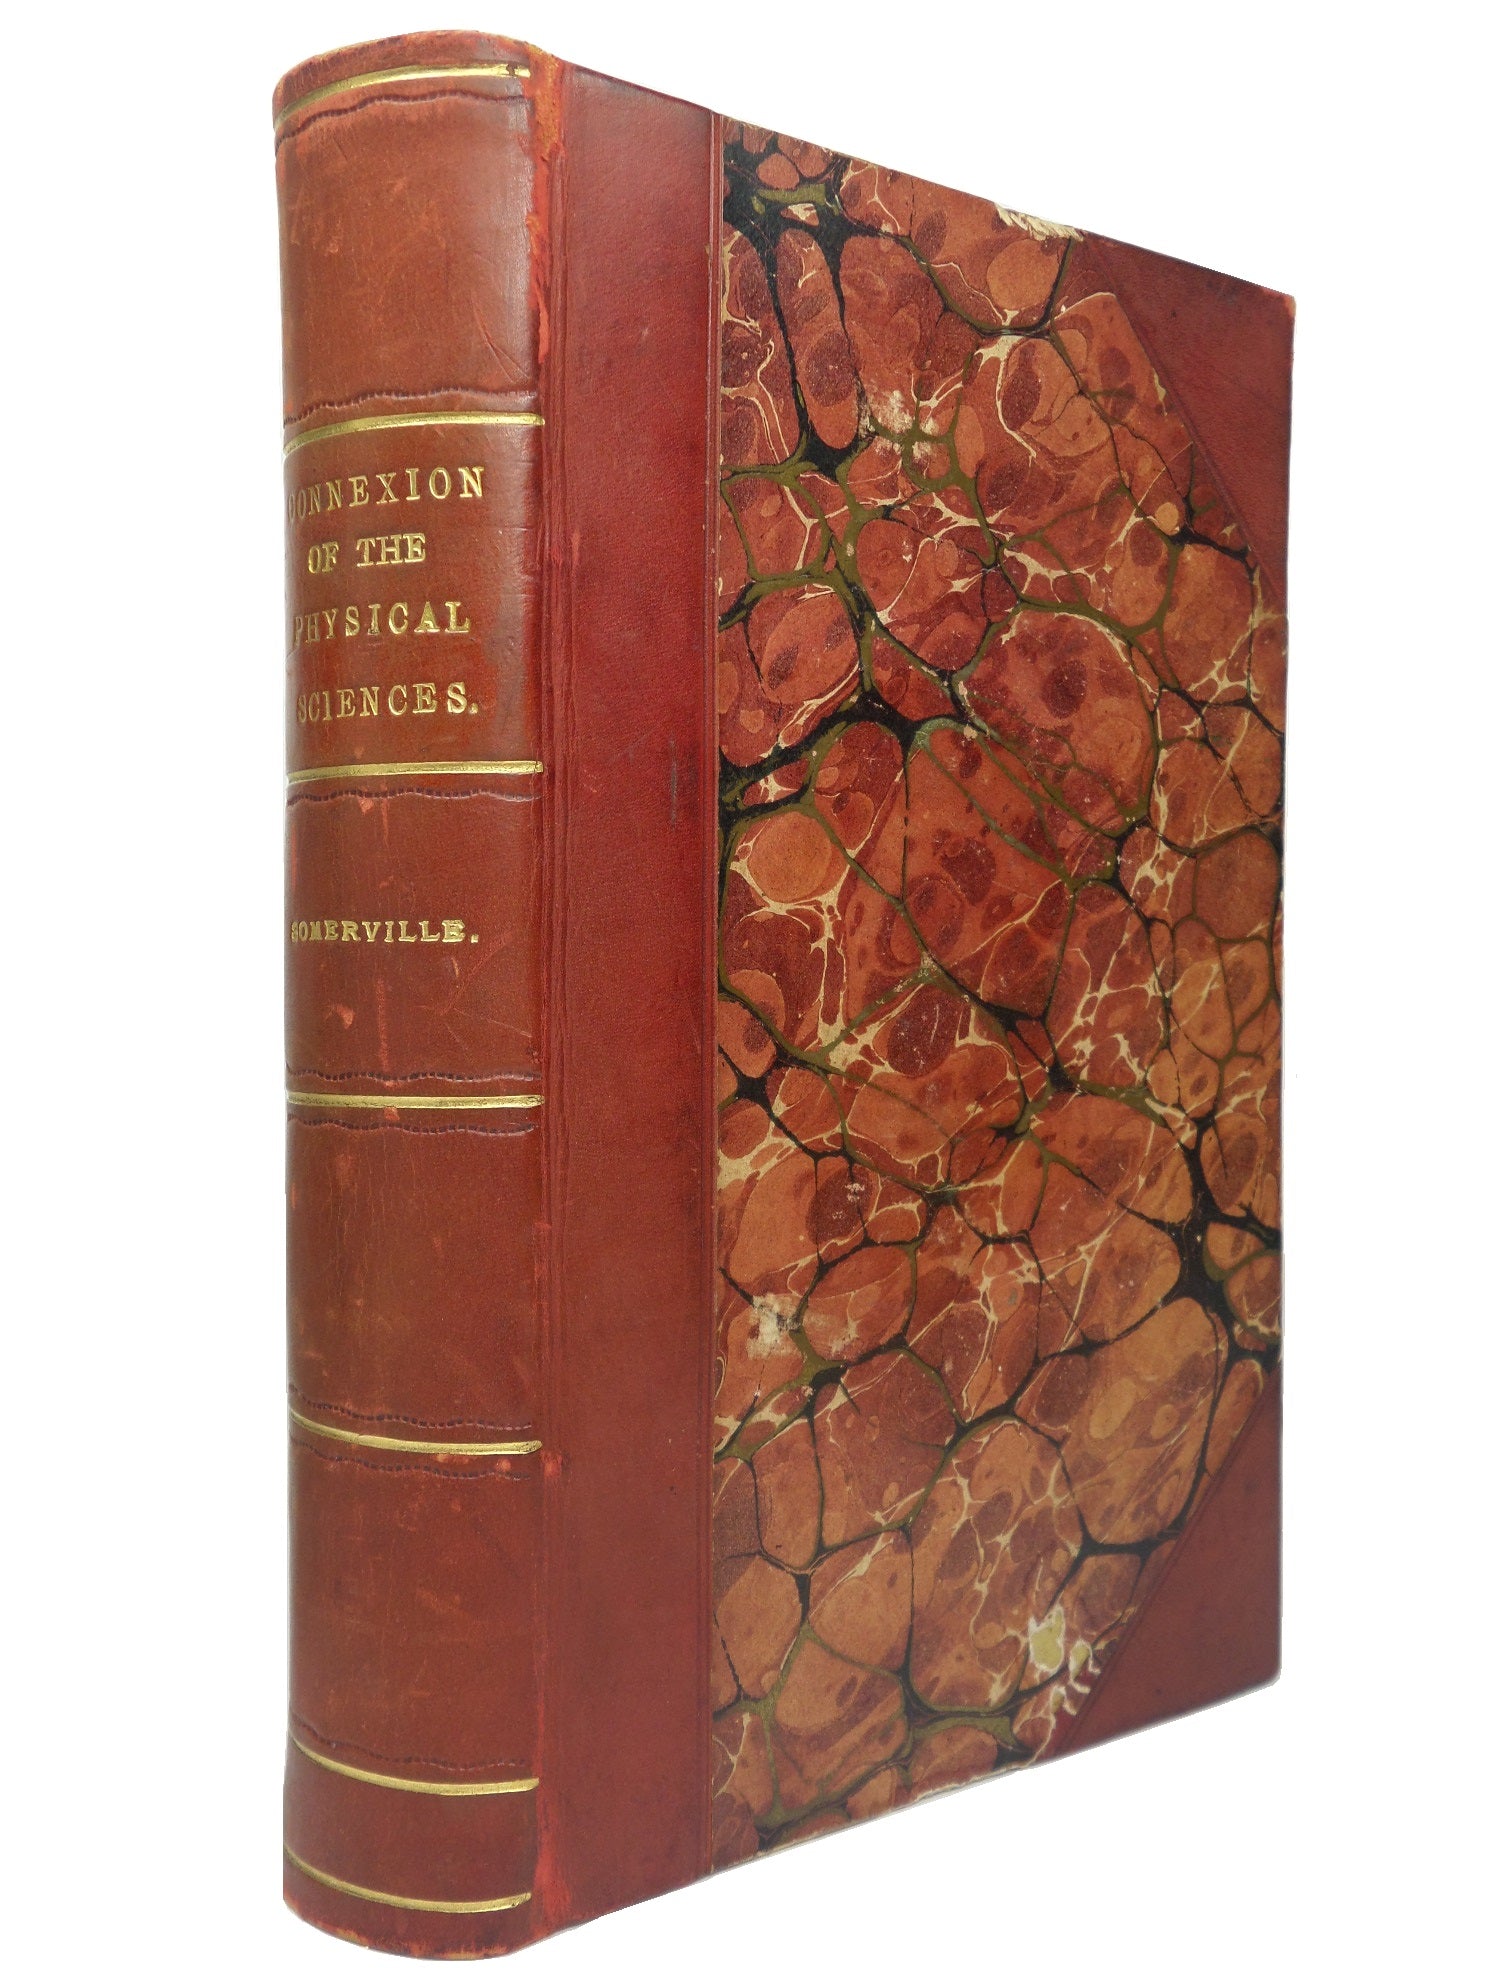 ON THE CONNEXION OF THE PHYSICAL SCIENCES BY MARY SOMERVILLE 1835 LEATHER-BOUND SECOND EDITION